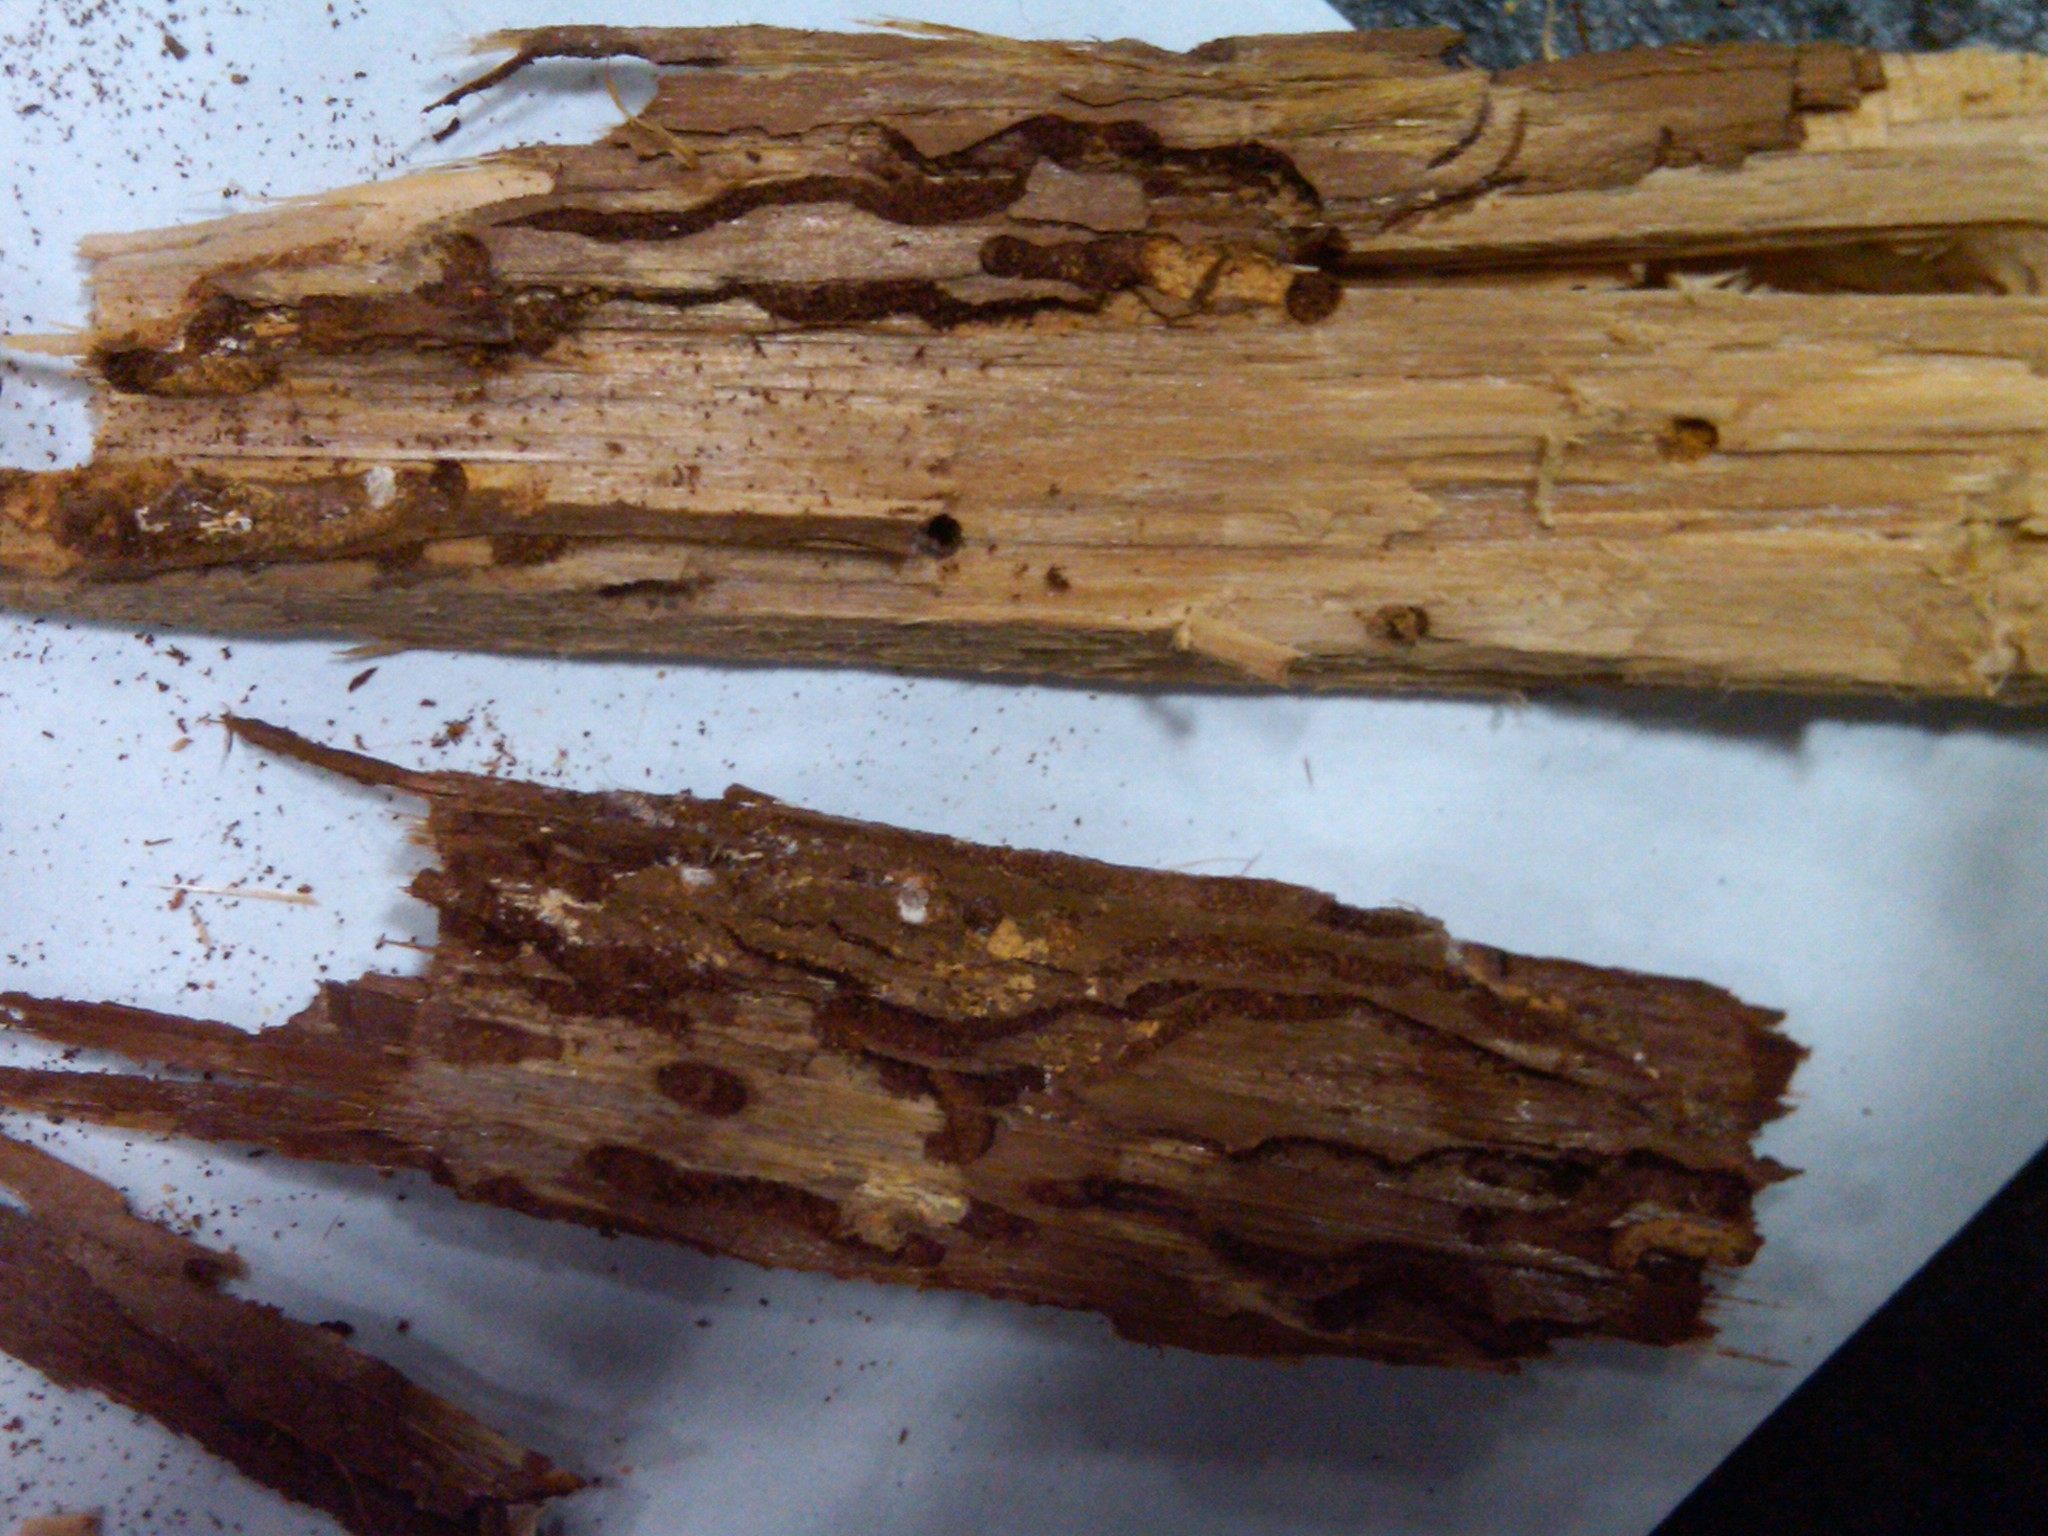 Photo of wood showing damage caused by wood-boring insects